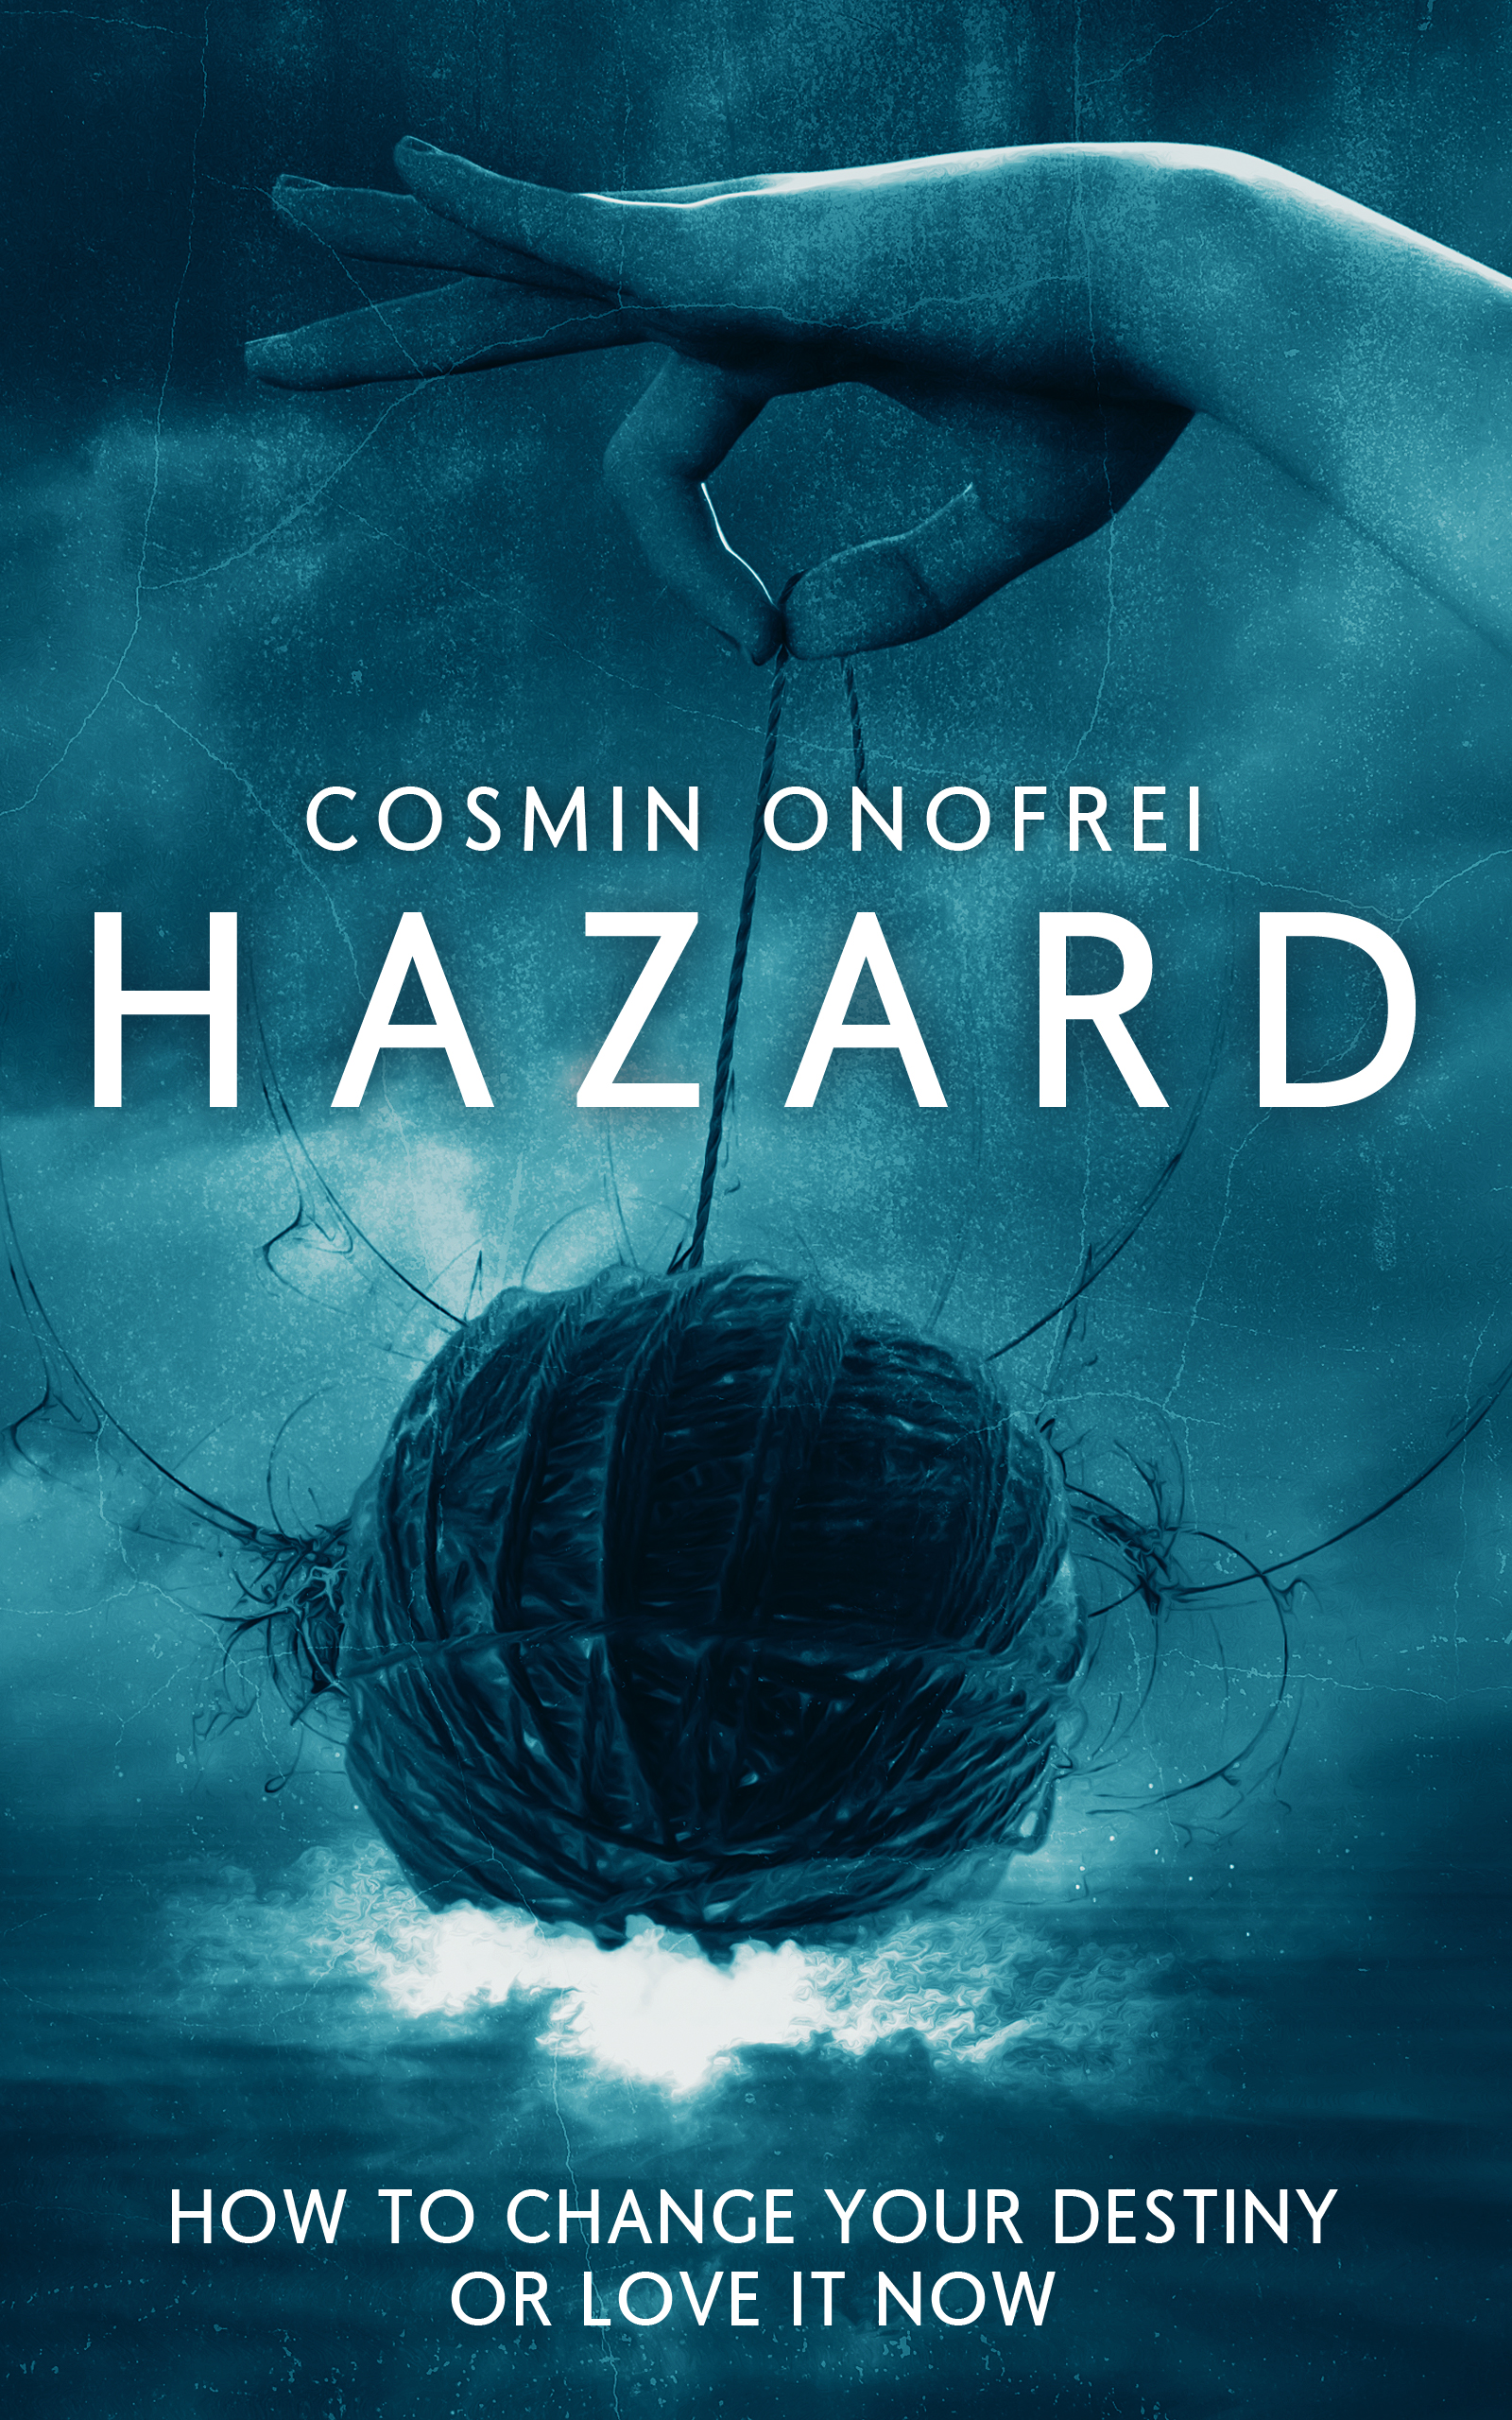 FREE: HAZARD: How To Change Your Destiny Or Love It Now by Cosmin Onofrei